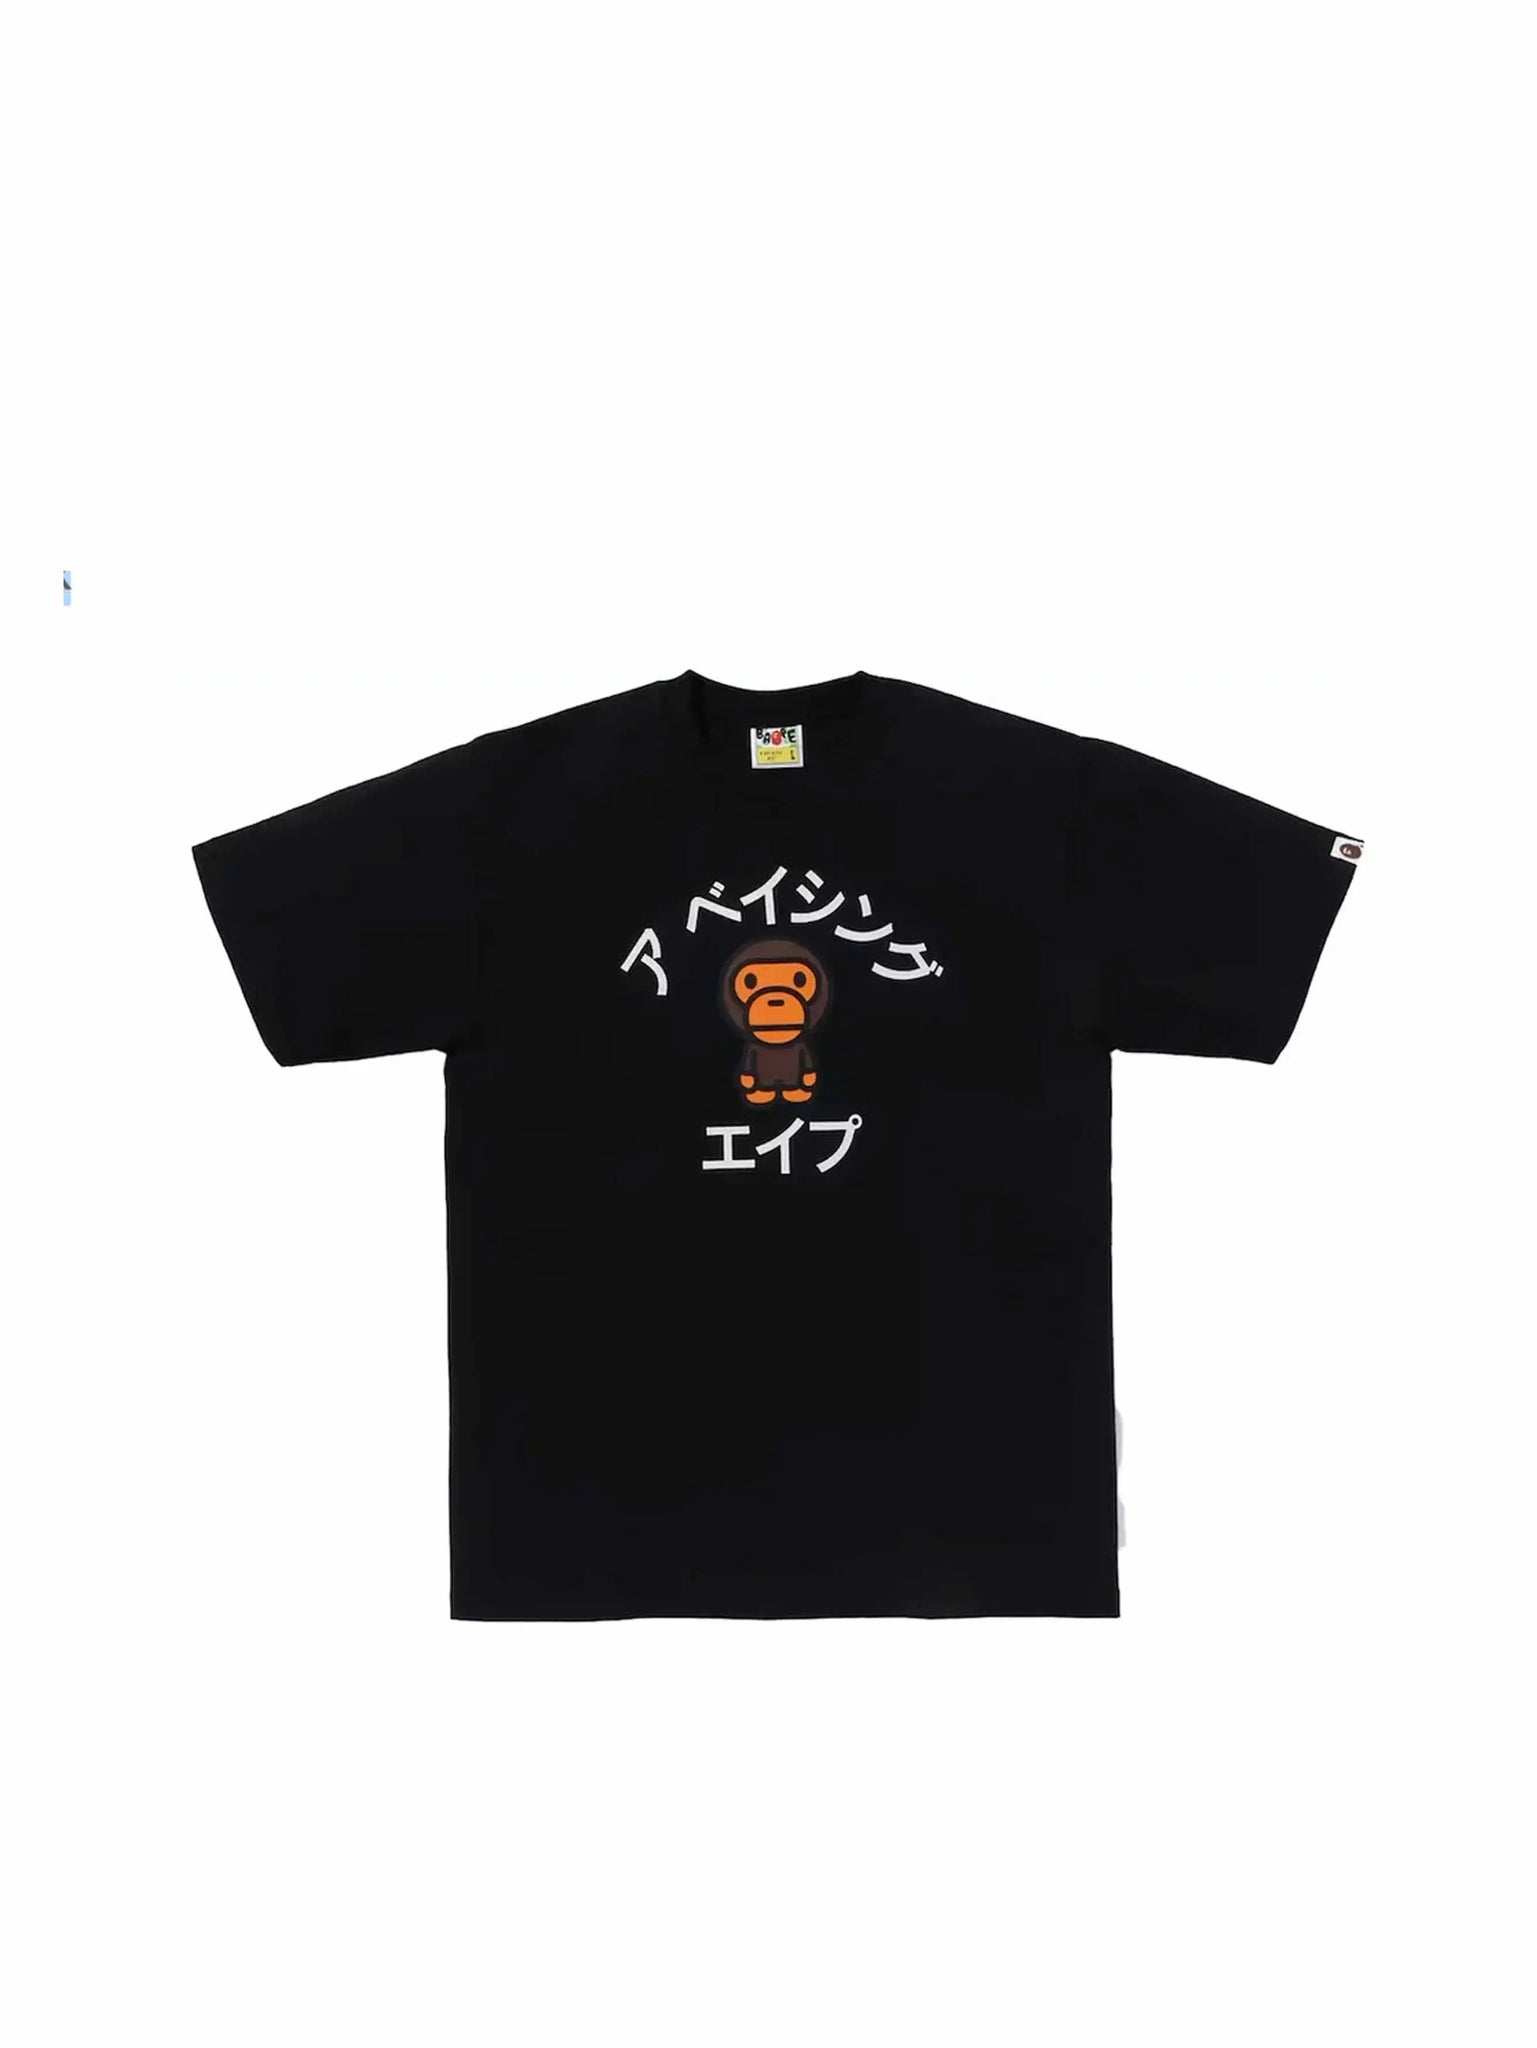 A Bathing Ape Baby Milo College Tee Black in Auckland, New Zealand - Shop name